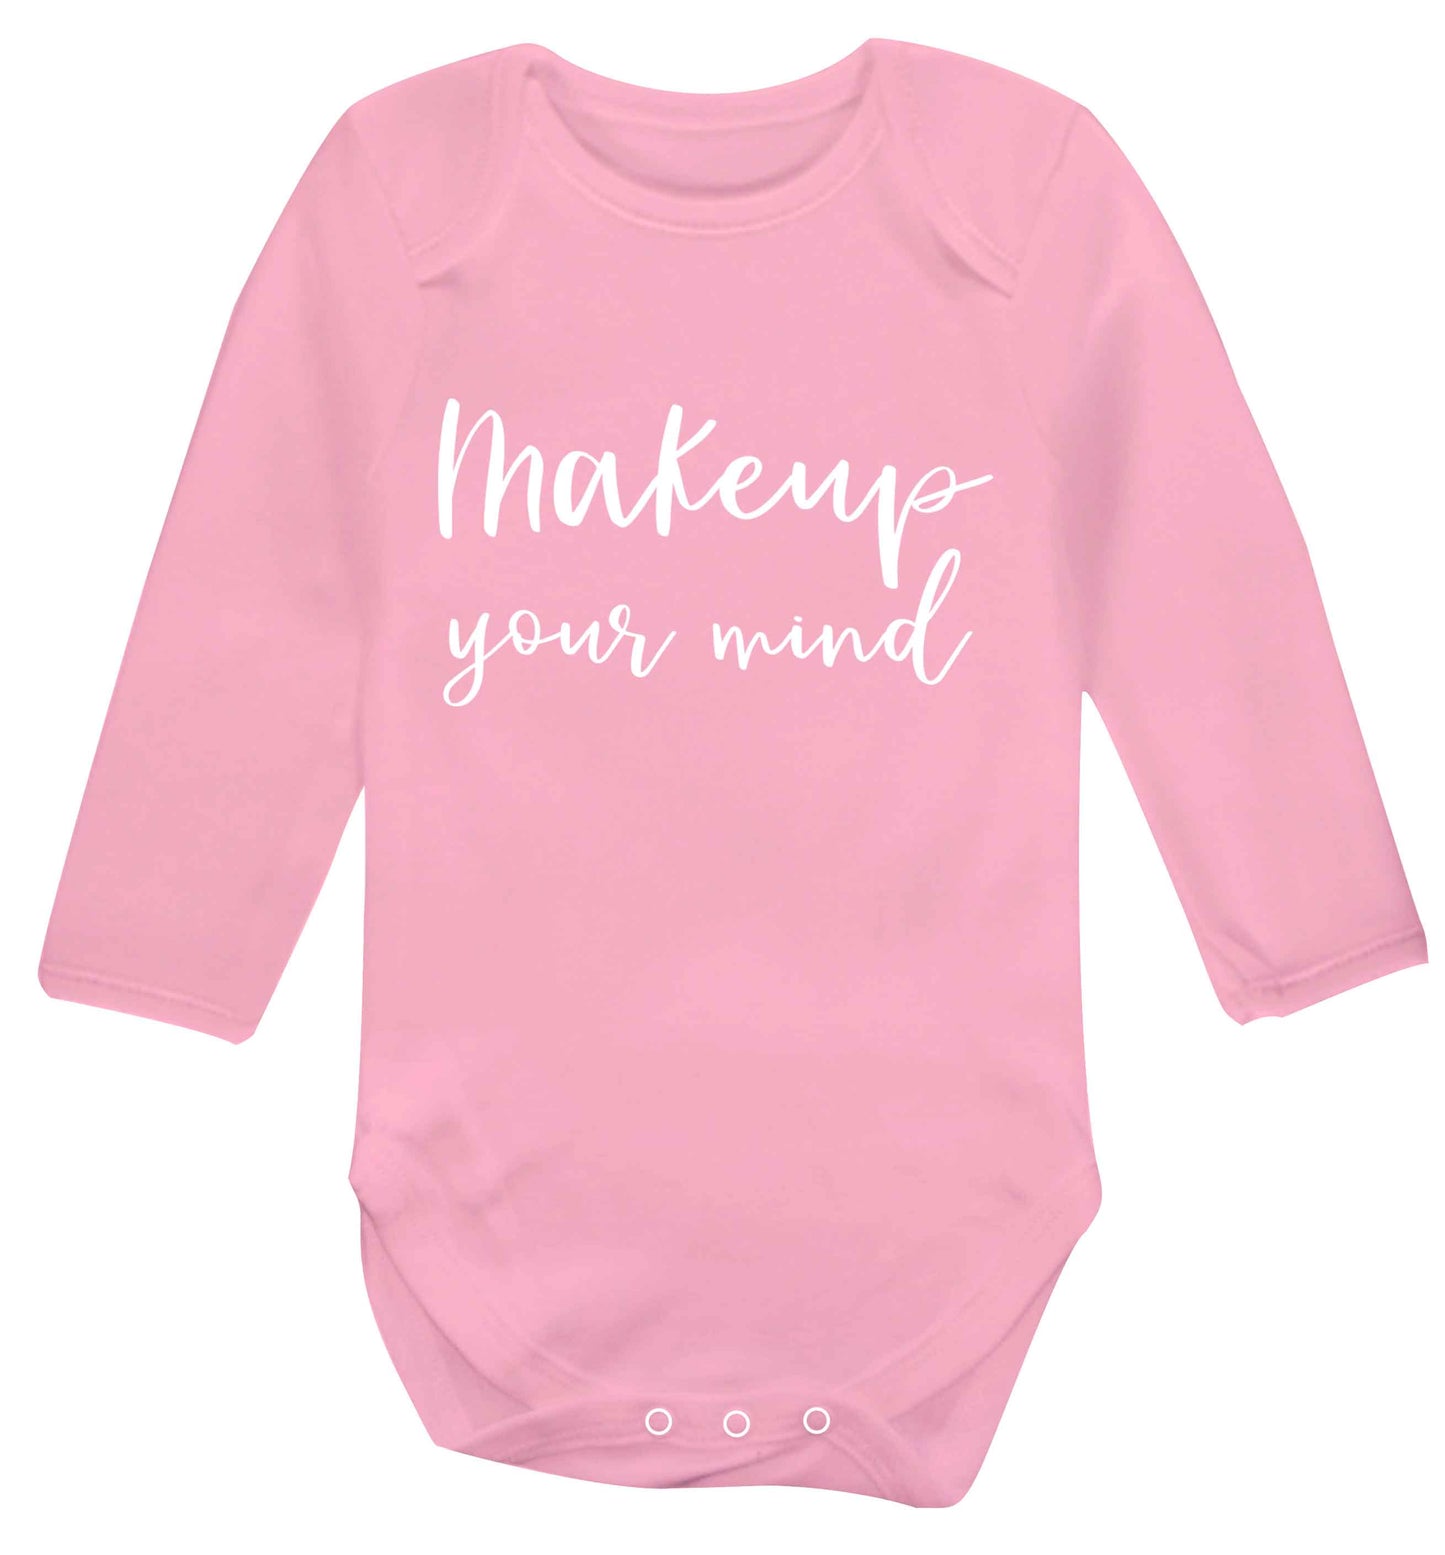 Makeup your mind Baby Vest long sleeved pale pink 6-12 months